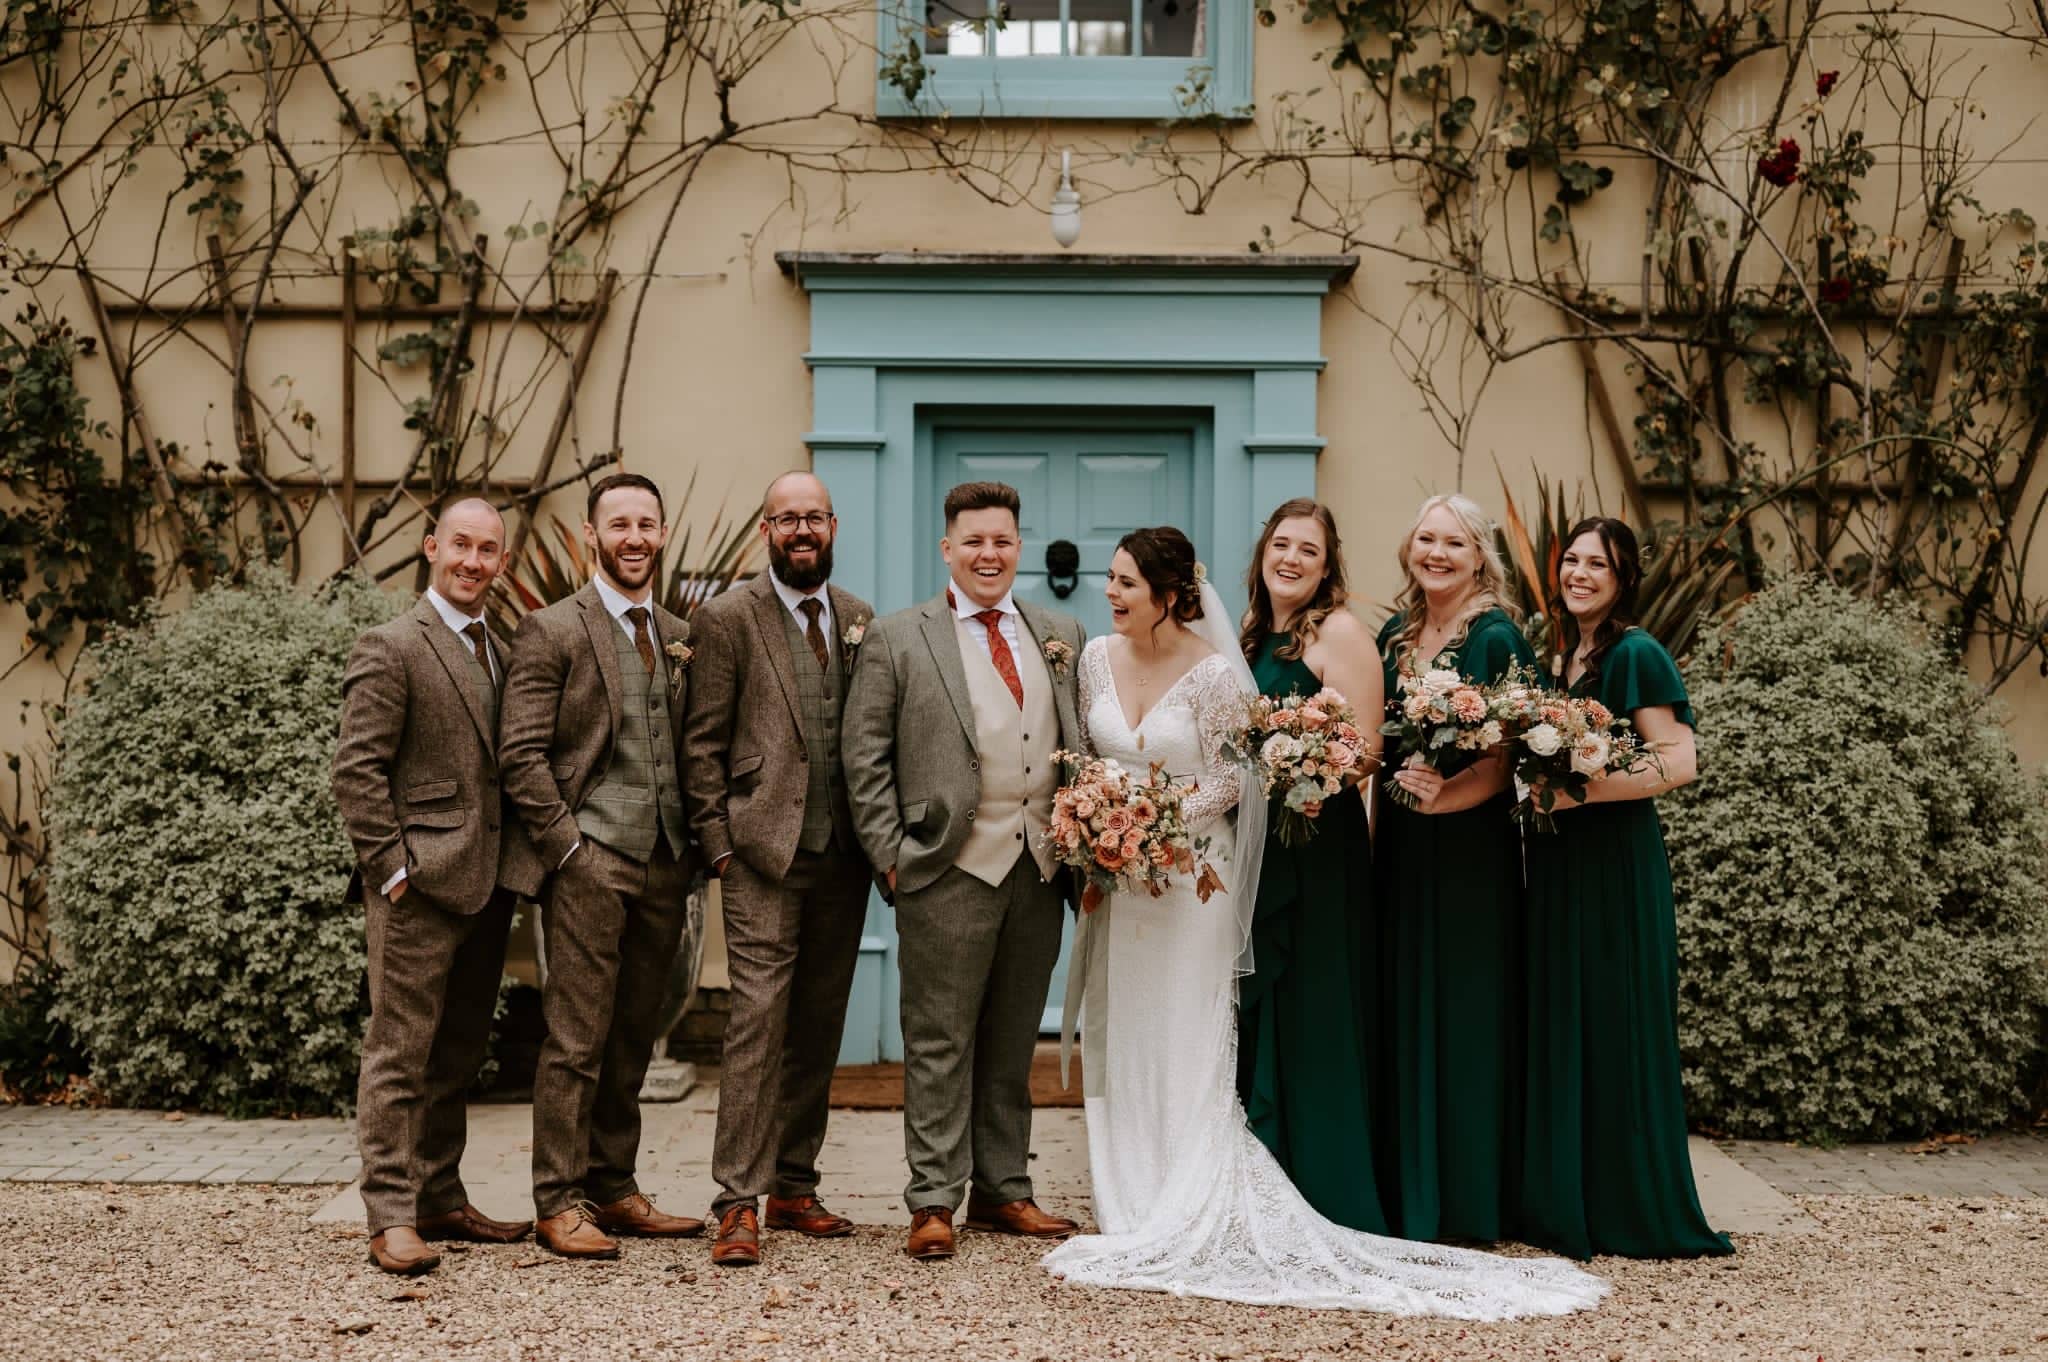 Bridal Party in Autumn Colours in front of countryhouse wedding venue